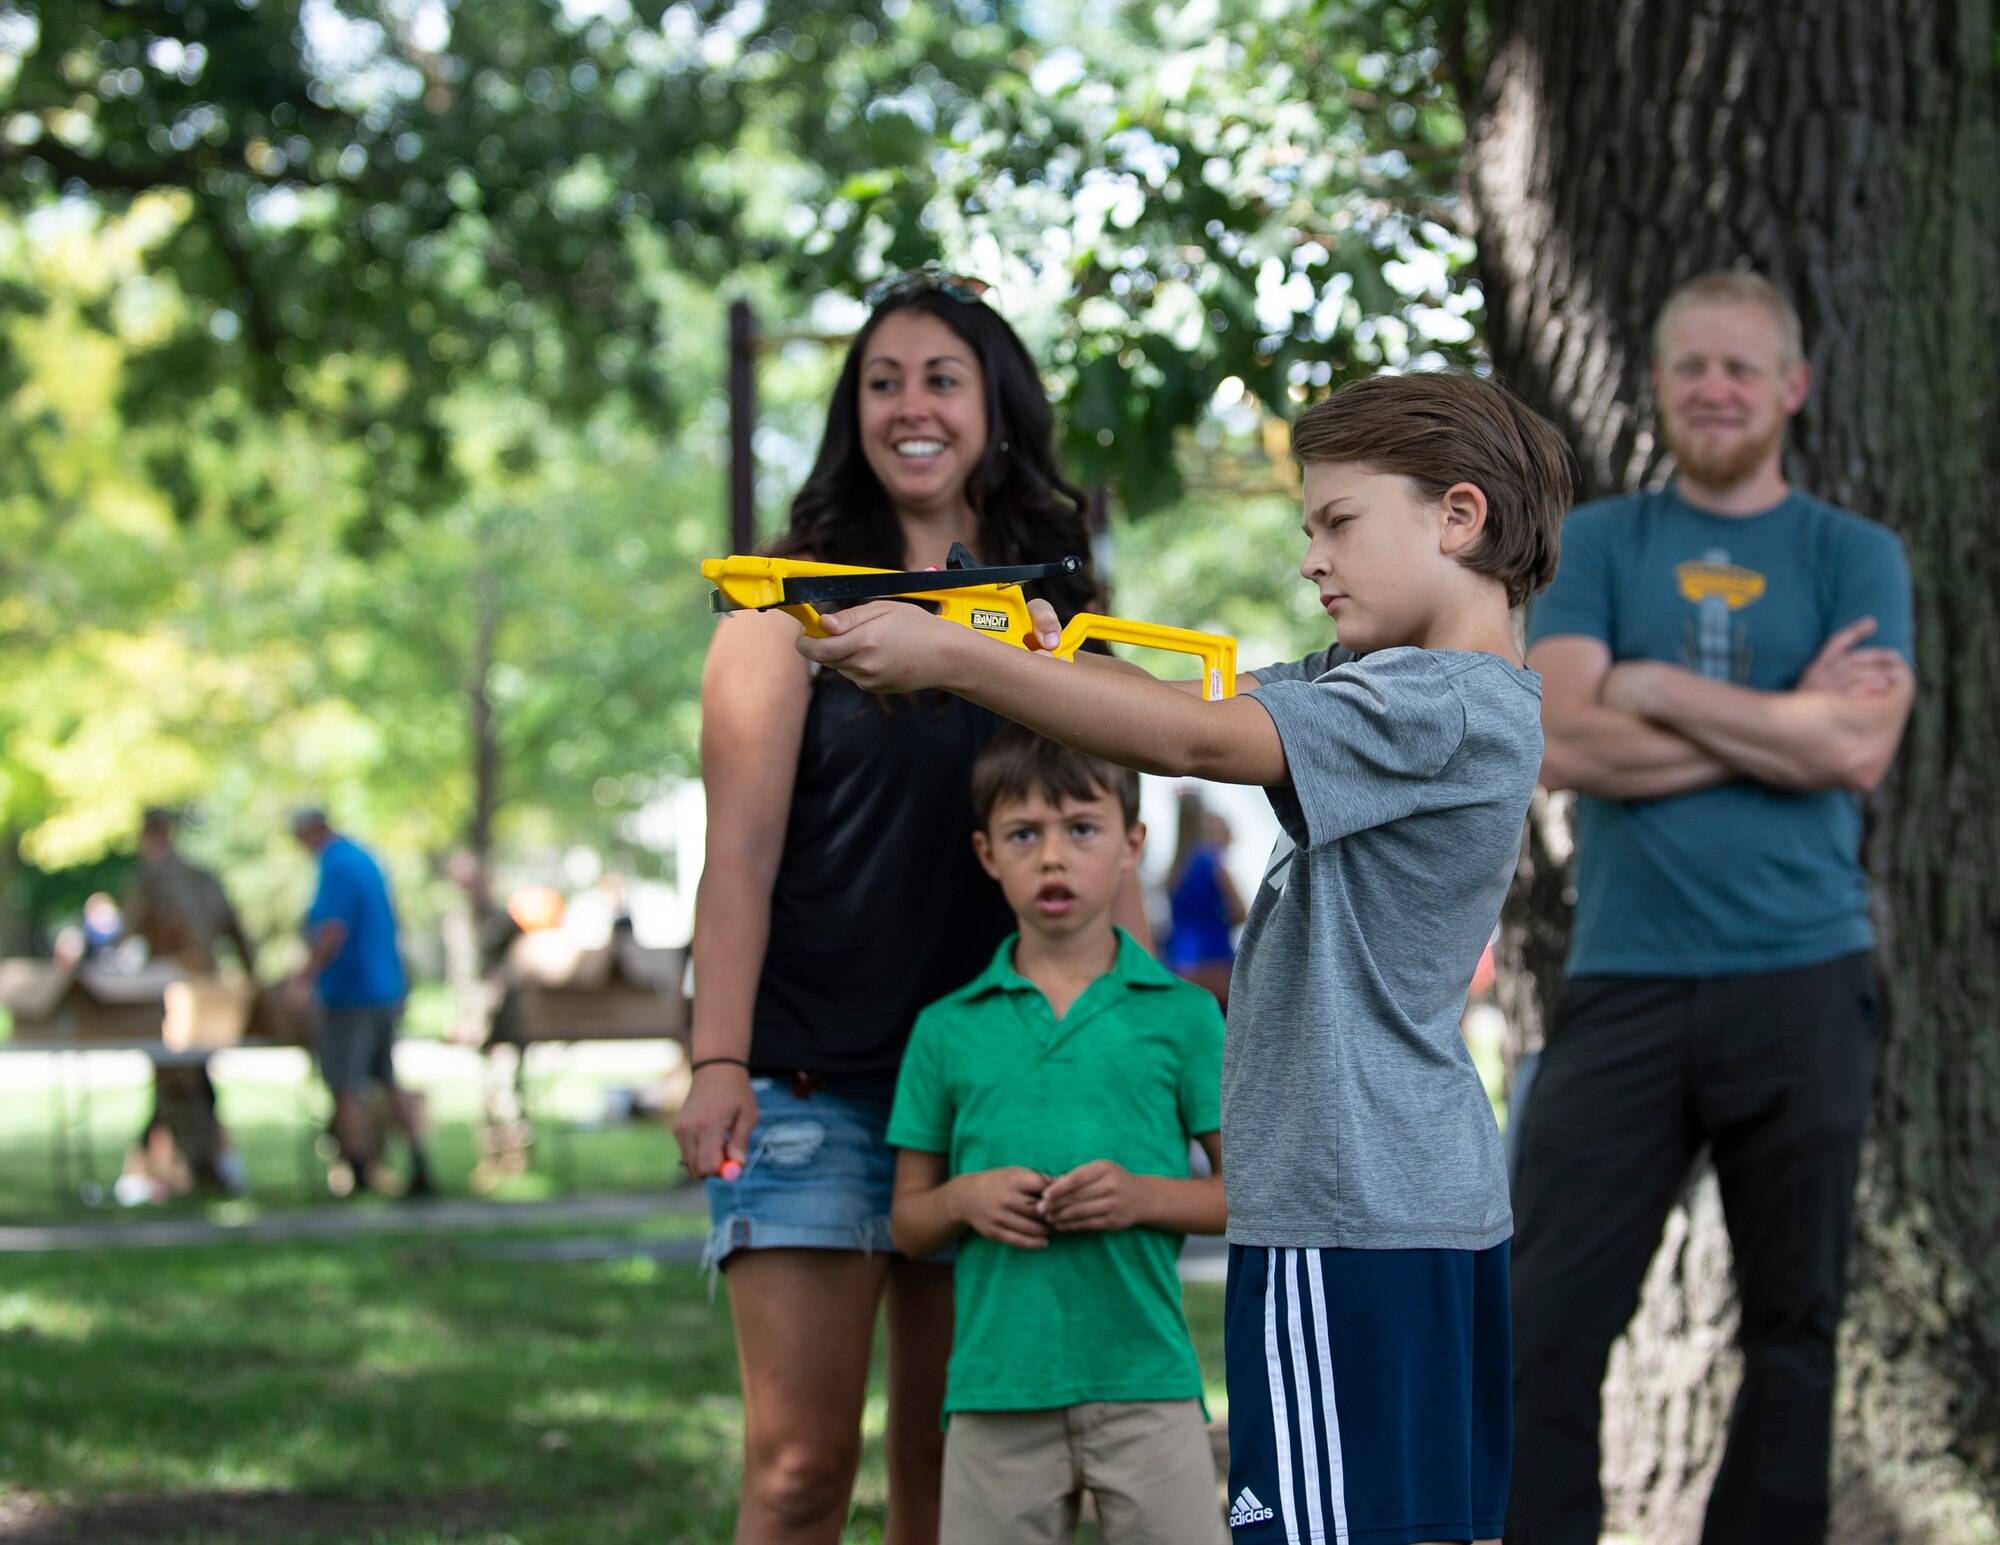 U.S. Air Force Airmen from the 133rd Airlift Wing, along with their families and friends, take part in Family Day activities in St. Paul, Minn., Aug. 21, 2022.